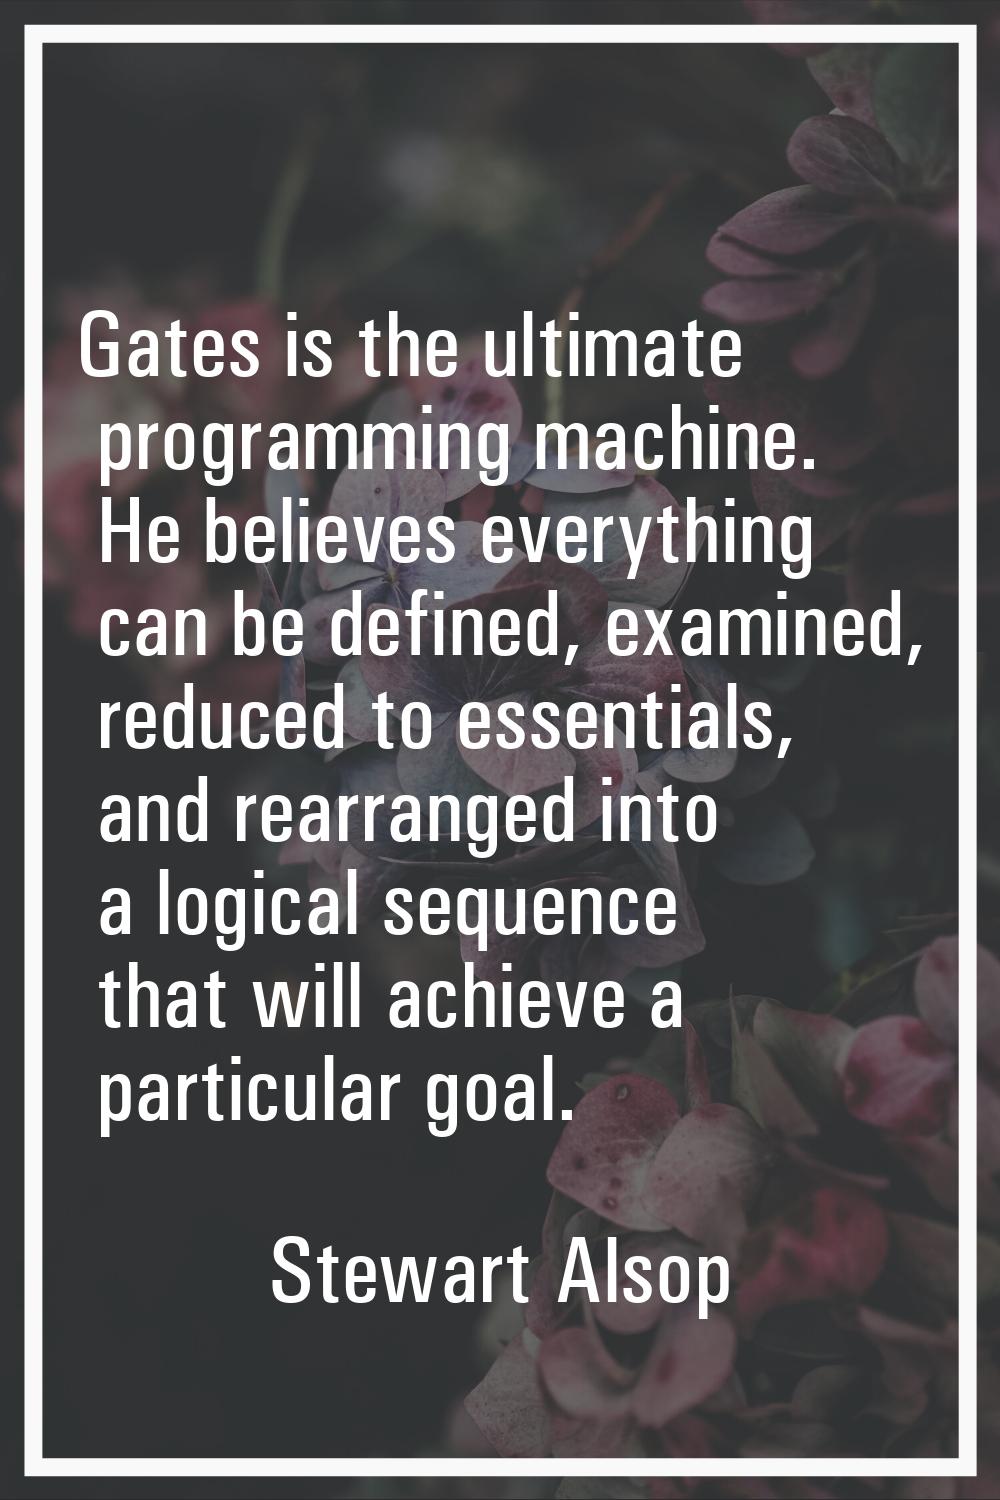 Gates is the ultimate programming machine. He believes everything can be defined, examined, reduced